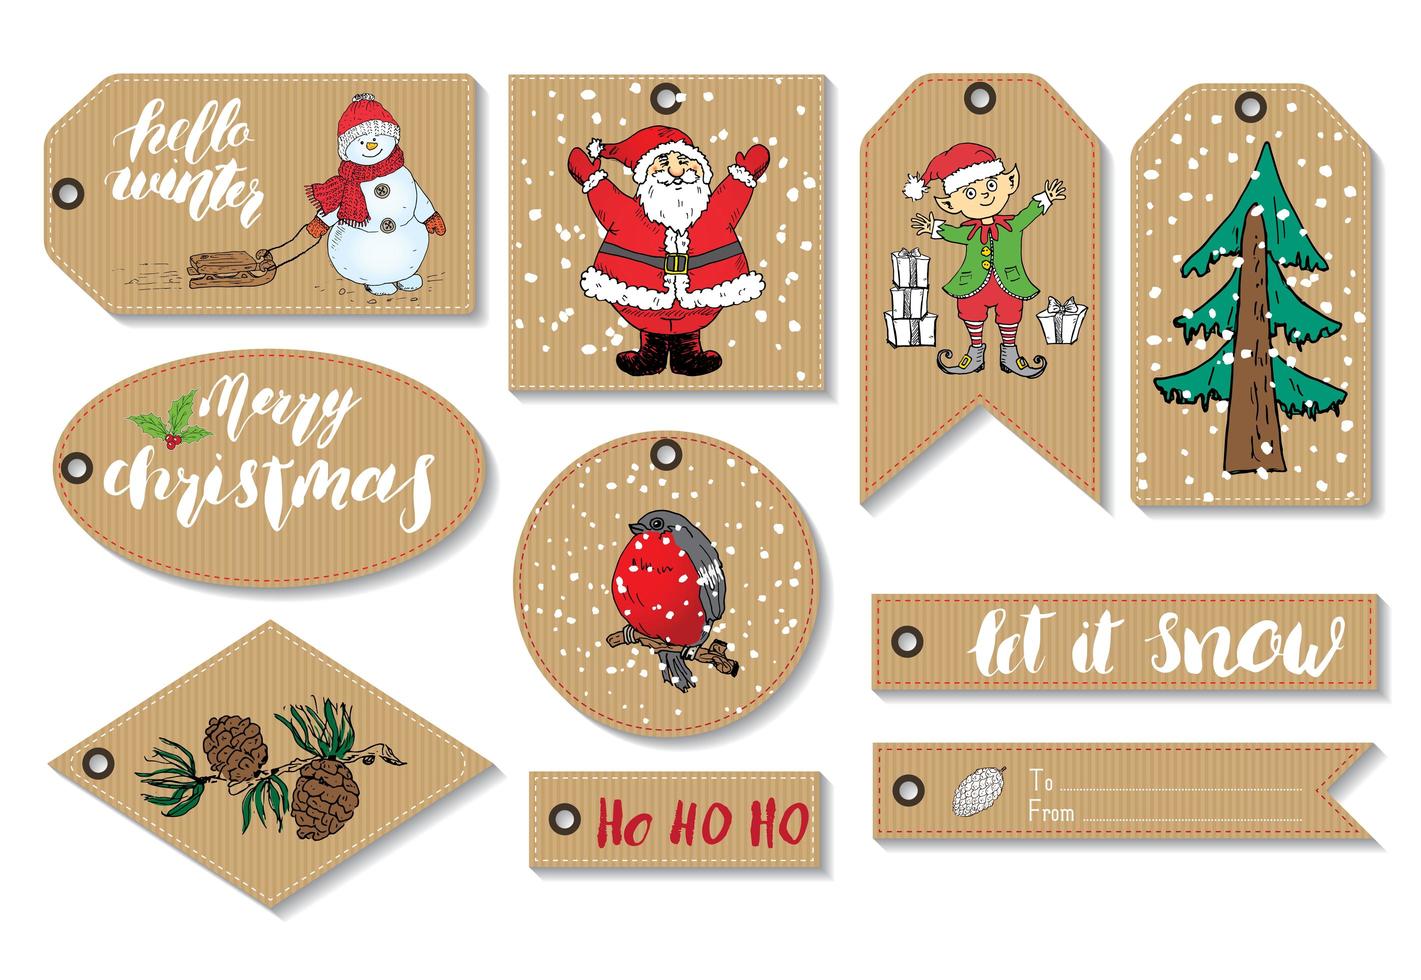 New Year and Christmas gift tags set. Hand drawn sketch greeting cards template with doodles festive elements. Vector illustration.